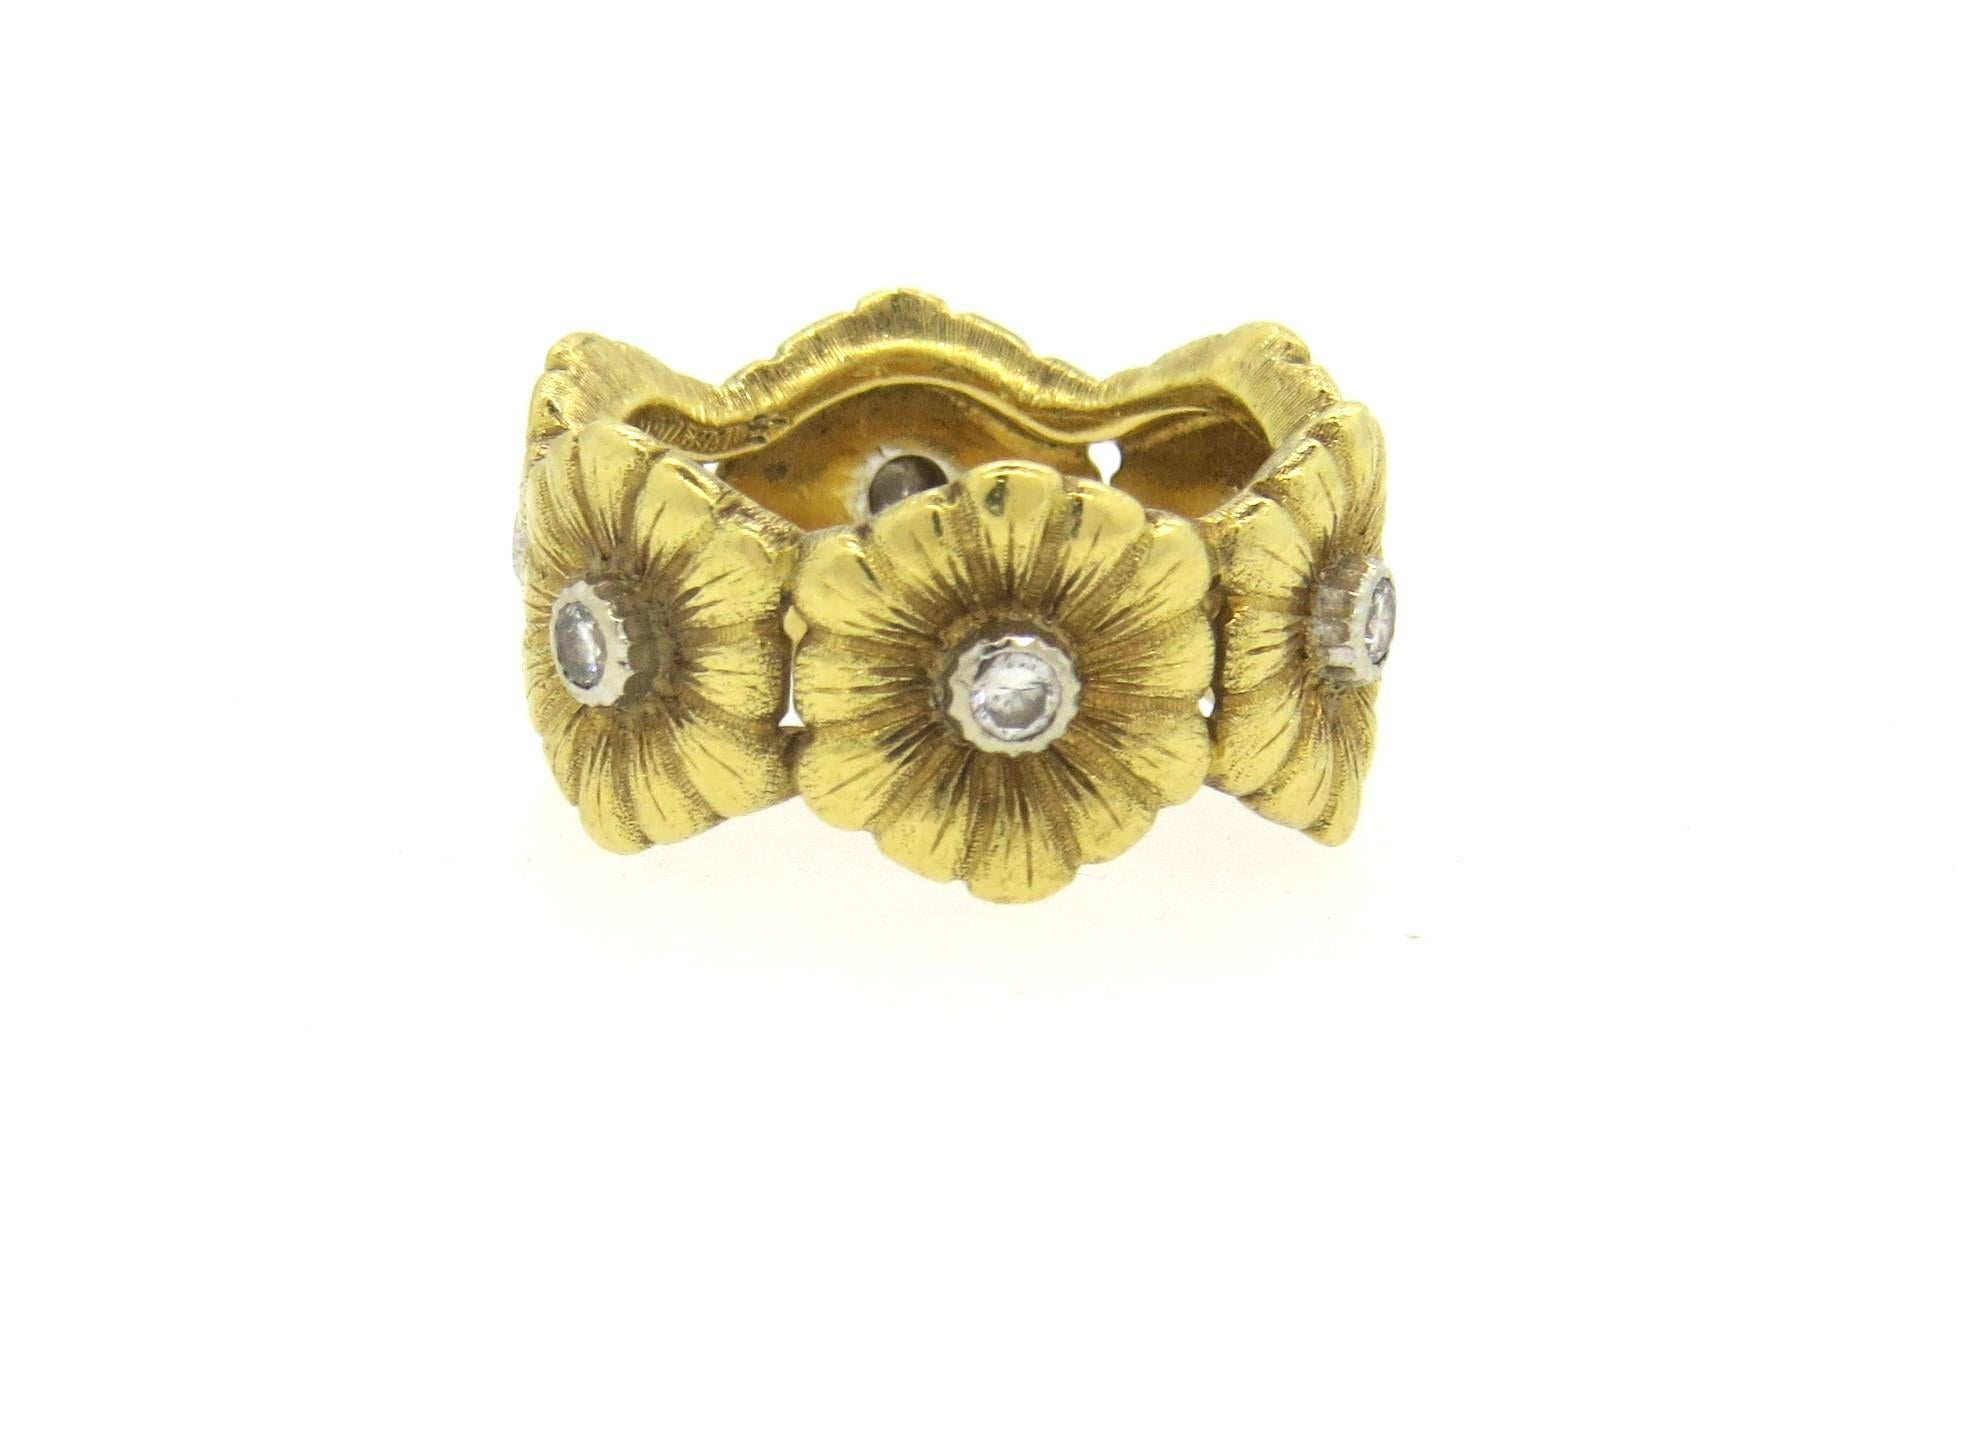 18k yellow gold band ring, crafted by Buccellati, featuring six flowers, each set with a diamond in the center. Ring is a size 4, ring is 10mm wide. Marked Buccellati, Italy. Weight of the piece - 7.7 grams
Comes with Buccellati box.